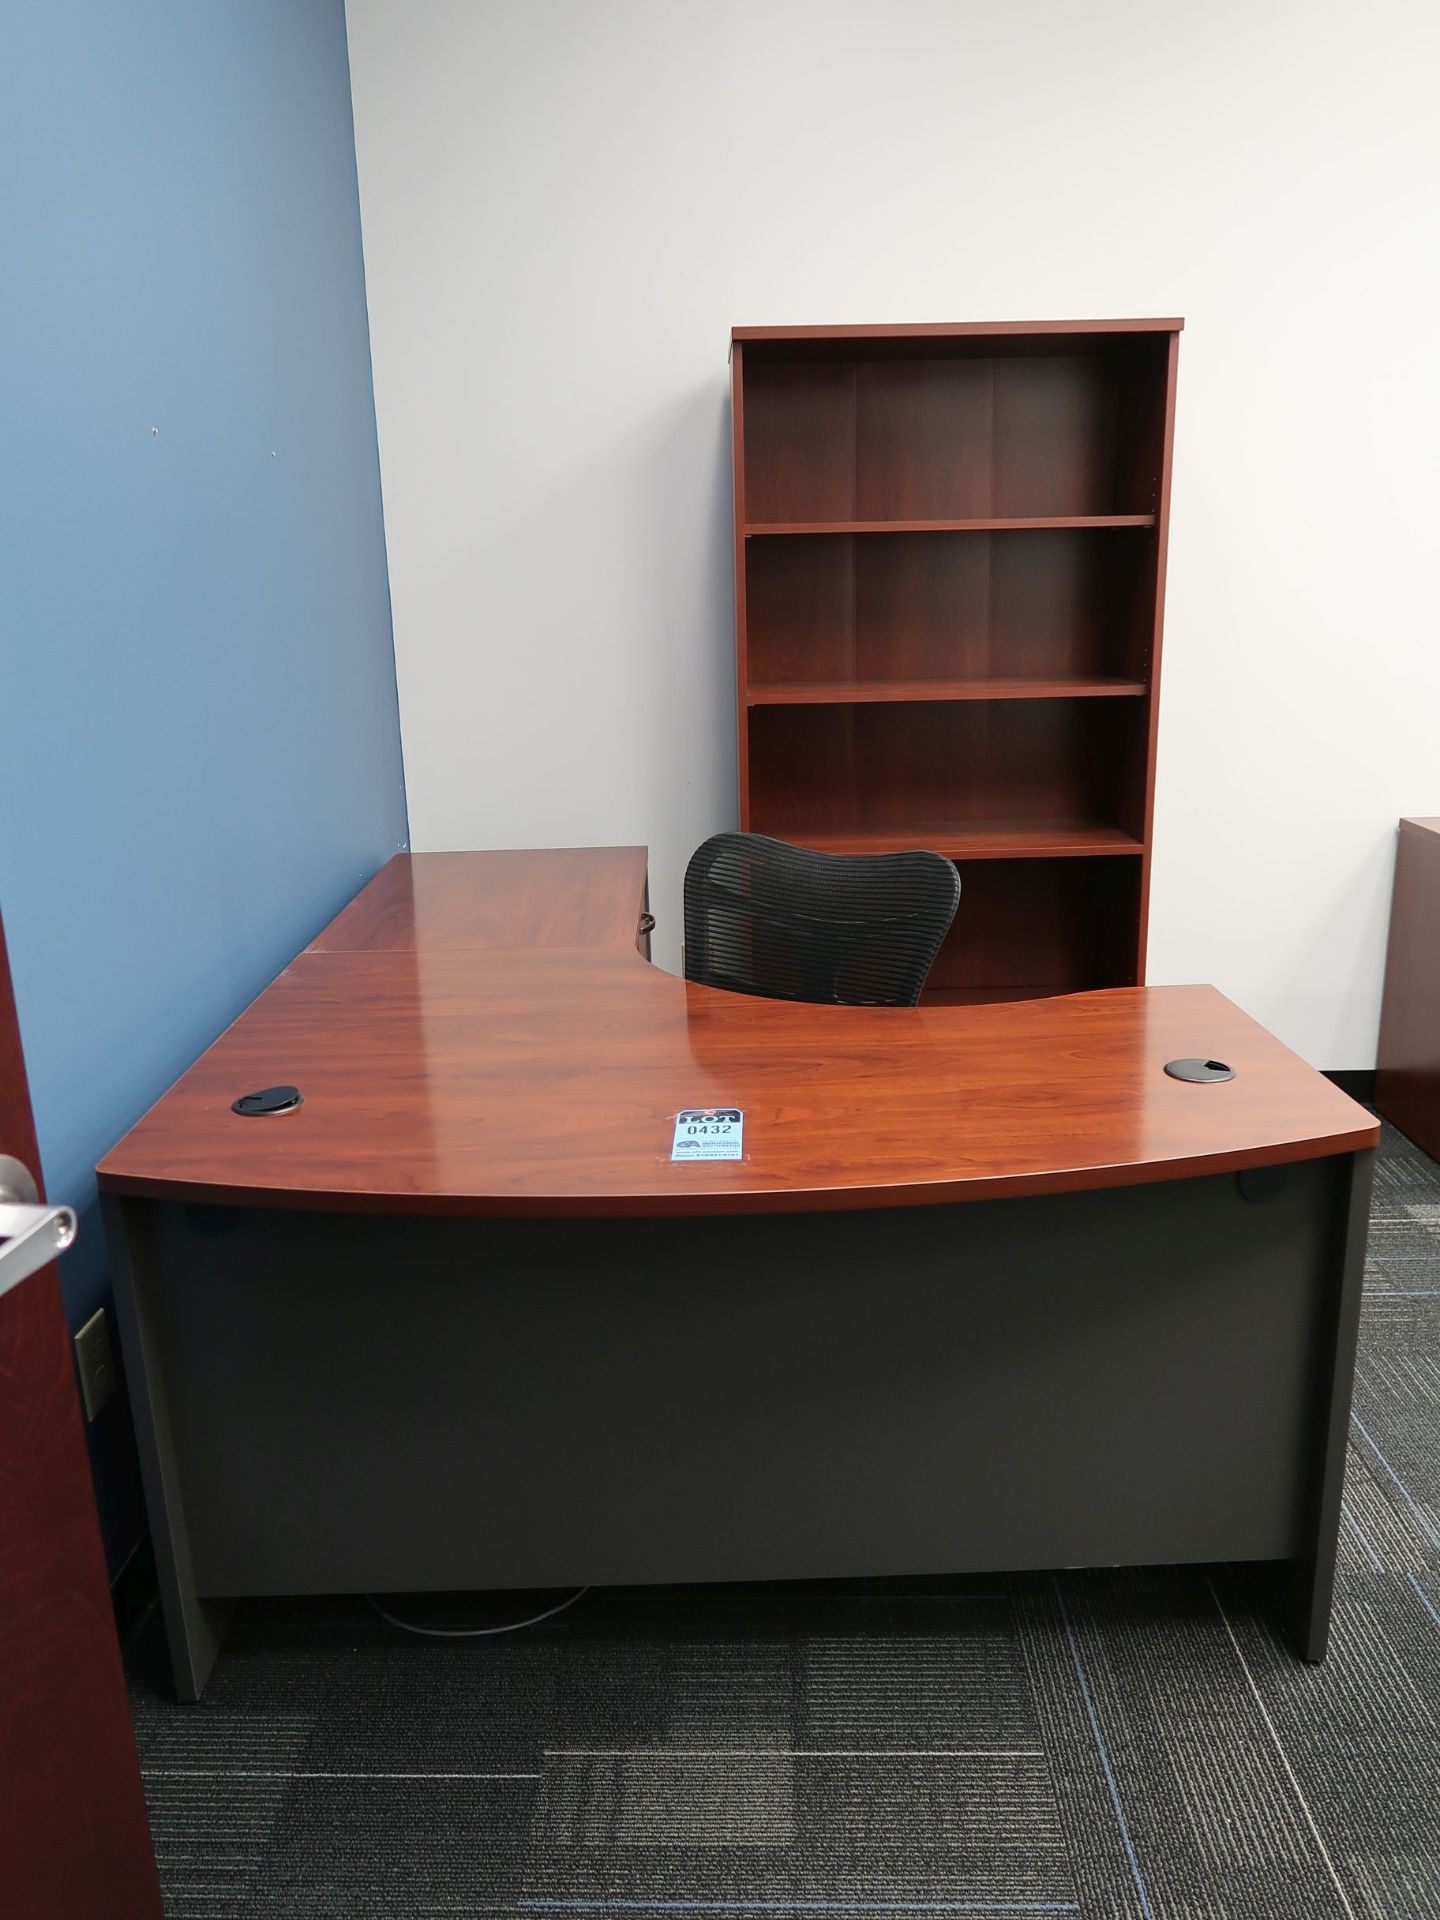 L-SHAPED MODULAR CURVED FRONT LAMINATED WOOD GRAIN FINISH OFFICE DESK W/ CHAIR & BOOKCASE